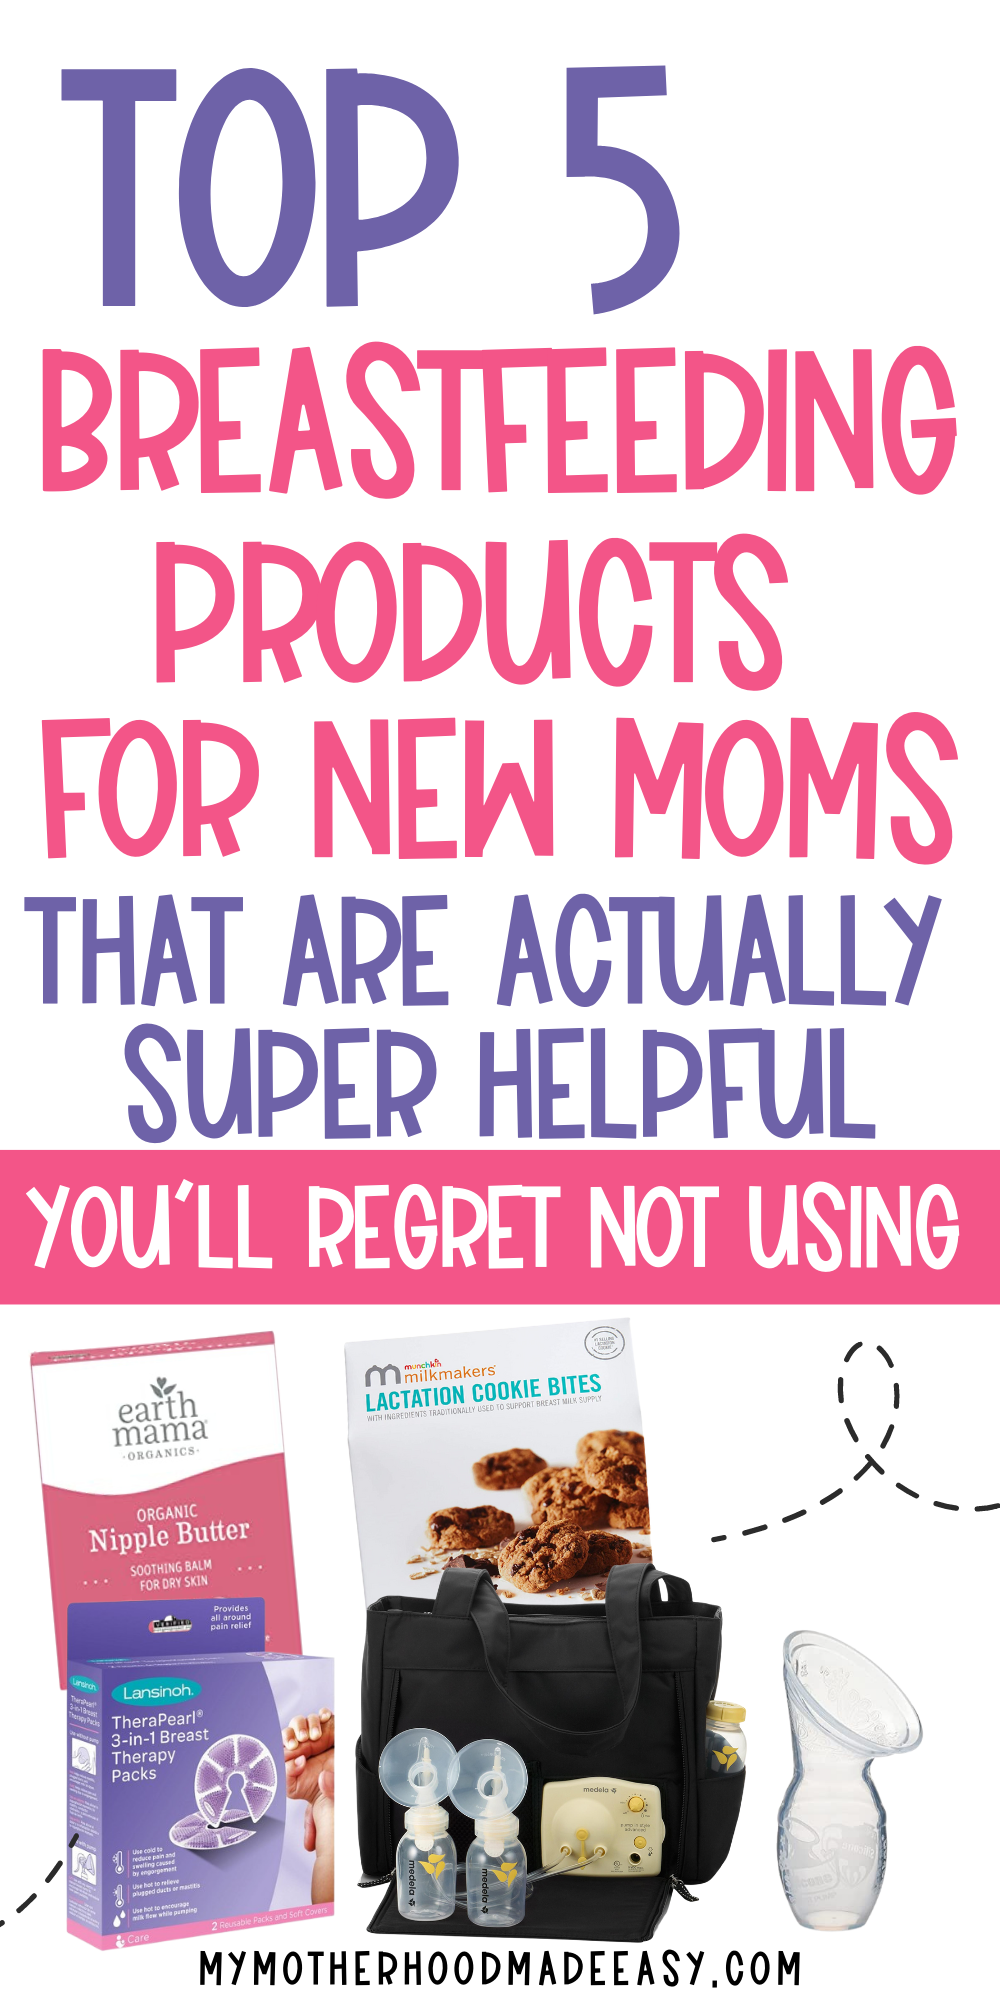 Breastfeeding is a very empowering and of course emotional experience for every mother. The beginning of breastfeeding experience was so stressful and emotional before I remodeled my whole approach and started implementing these top 10 breastfeeding tips and products. #breastfeeding #nursingmom #newmom #newborn best breastfeeding products best products for breastfeeding breastfeeding tips breastfeeding must haves products top breastfeeding products it works products safe for breastfeeding it works products while breastfeeding